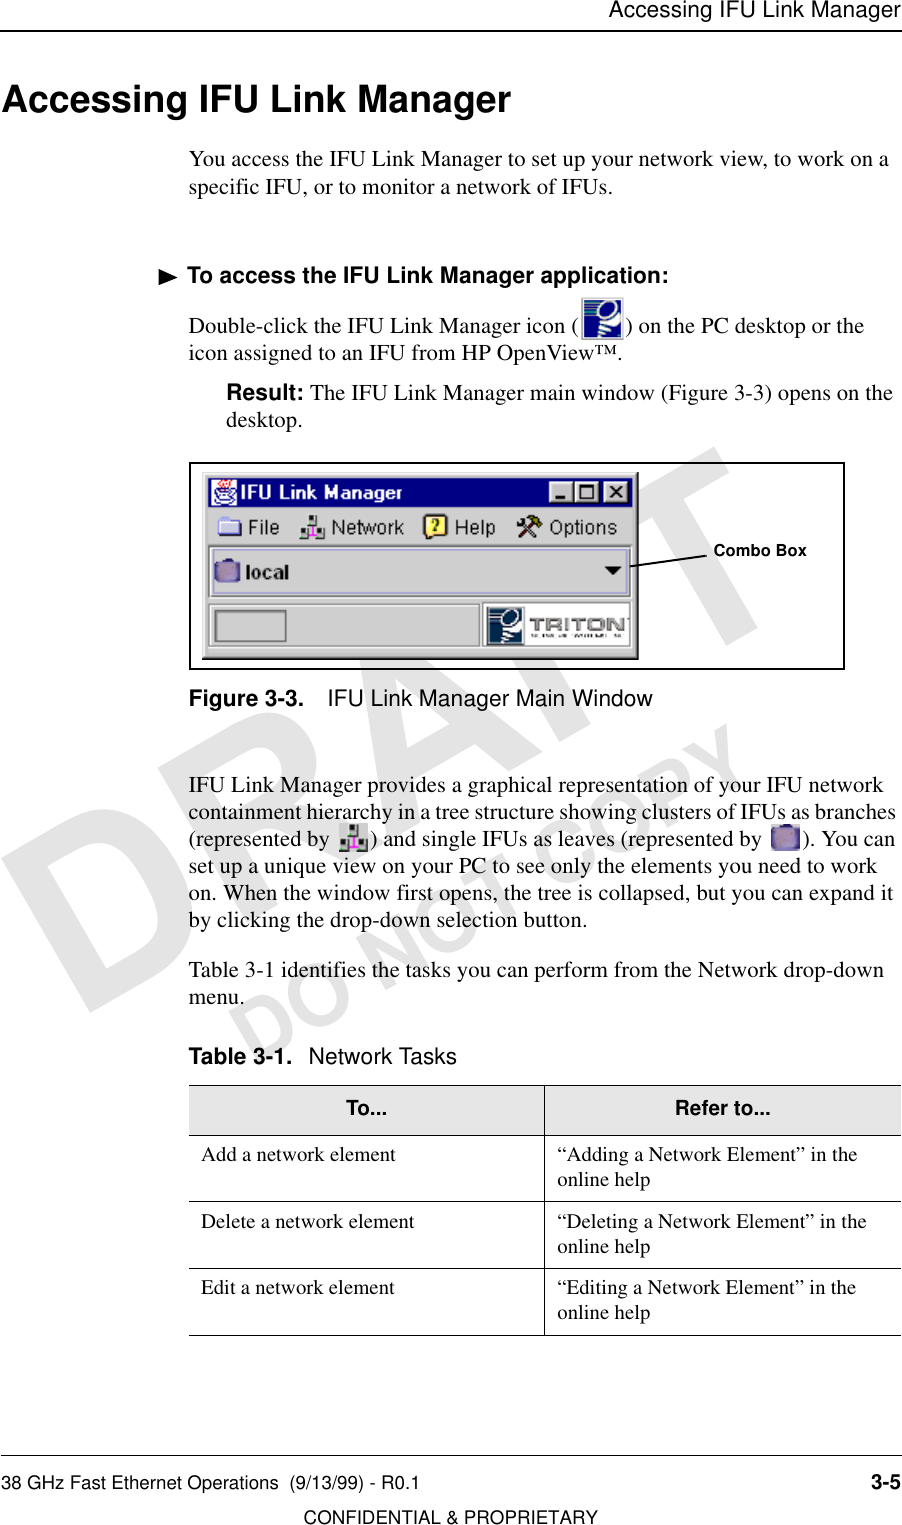 Accessing IFU Link Manager38 GHz Fast Ethernet Operations  (9/13/99) - R0.1 3-5CONFIDENTIAL &amp; PROPRIETARYDO NOT COPYAccessing IFU Link ManagerYou access the IFU Link Manager to set up your network view, to work on a specific IFU, or to monitor a network of IFUs.To access the IFU Link Manager application:Double-click the IFU Link Manager icon ( ) on the PC desktop or the icon assigned to an IFU from HP OpenView™.Result: The IFU Link Manager main window (Figure 3-3) opens on the desktop.Figure 3-3. IFU Link Manager Main WindowIFU Link Manager provides a graphical representation of your IFU network containment hierarchy in a tree structure showing clusters of IFUs as branches (represented by  ) and single IFUs as leaves (represented by  ). You can set up a unique view on your PC to see only the elements you need to work on. When the window first opens, the tree is collapsed, but you can expand it by clicking the drop-down selection button. Table 3-1 identifies the tasks you can perform from the Network drop-down menu.Table 3-1. Network TasksTo... Refer to...Add a network element “Adding a Network Element” in the online helpDelete a network element “Deleting a Network Element” in the online helpEdit a network element “Editing a Network Element” in the online help Combo Box